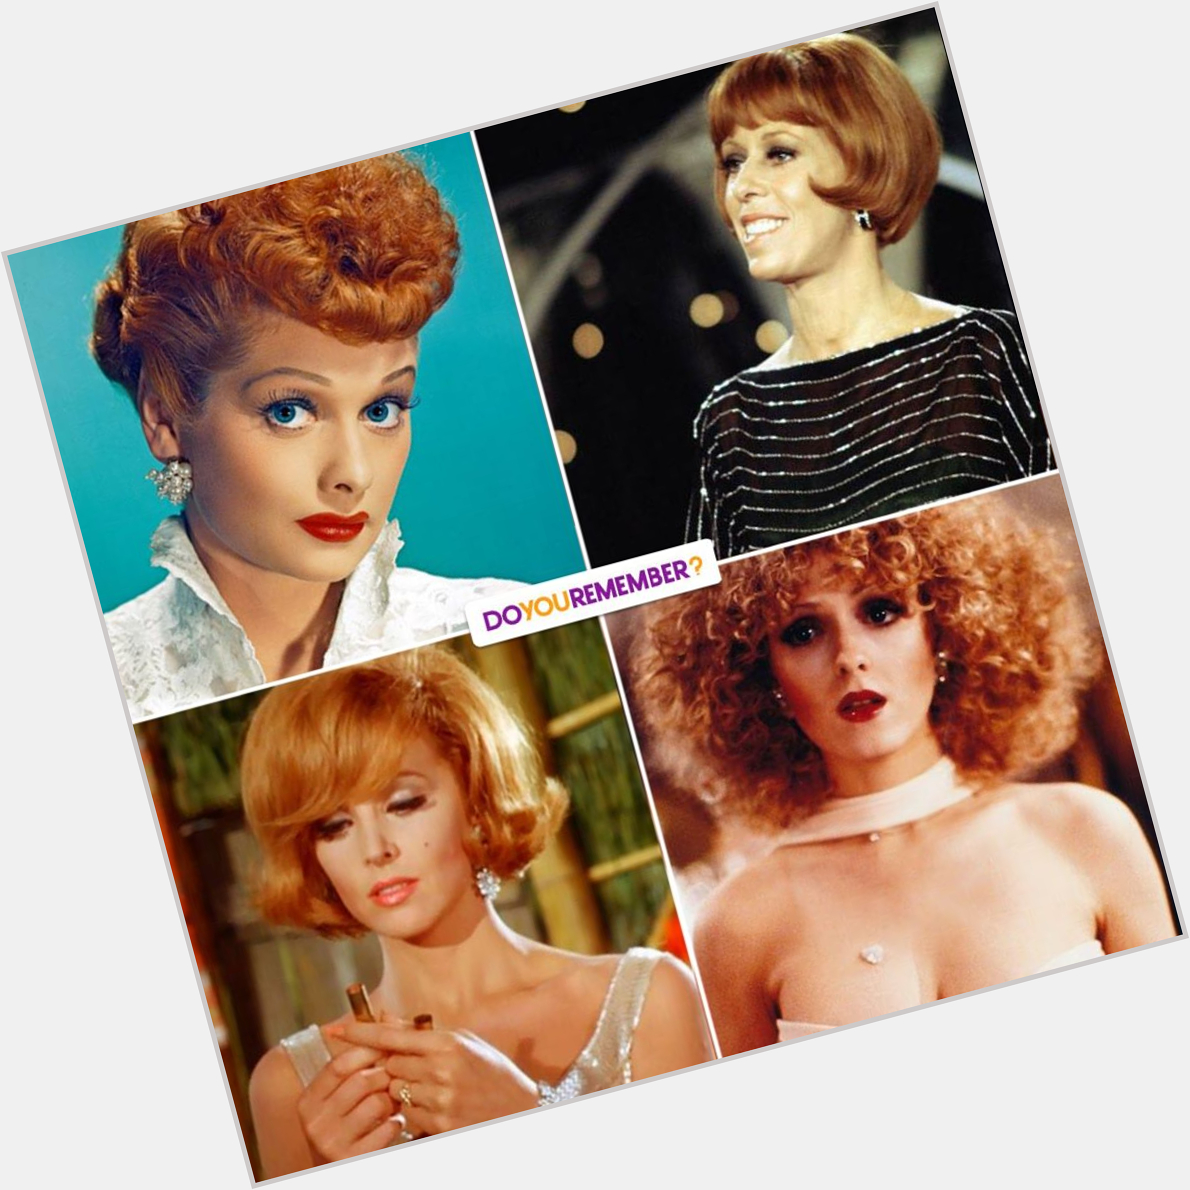 Happy 72nd Birthday to Bernadette Peters!
Who is your personal favorite redhead? 